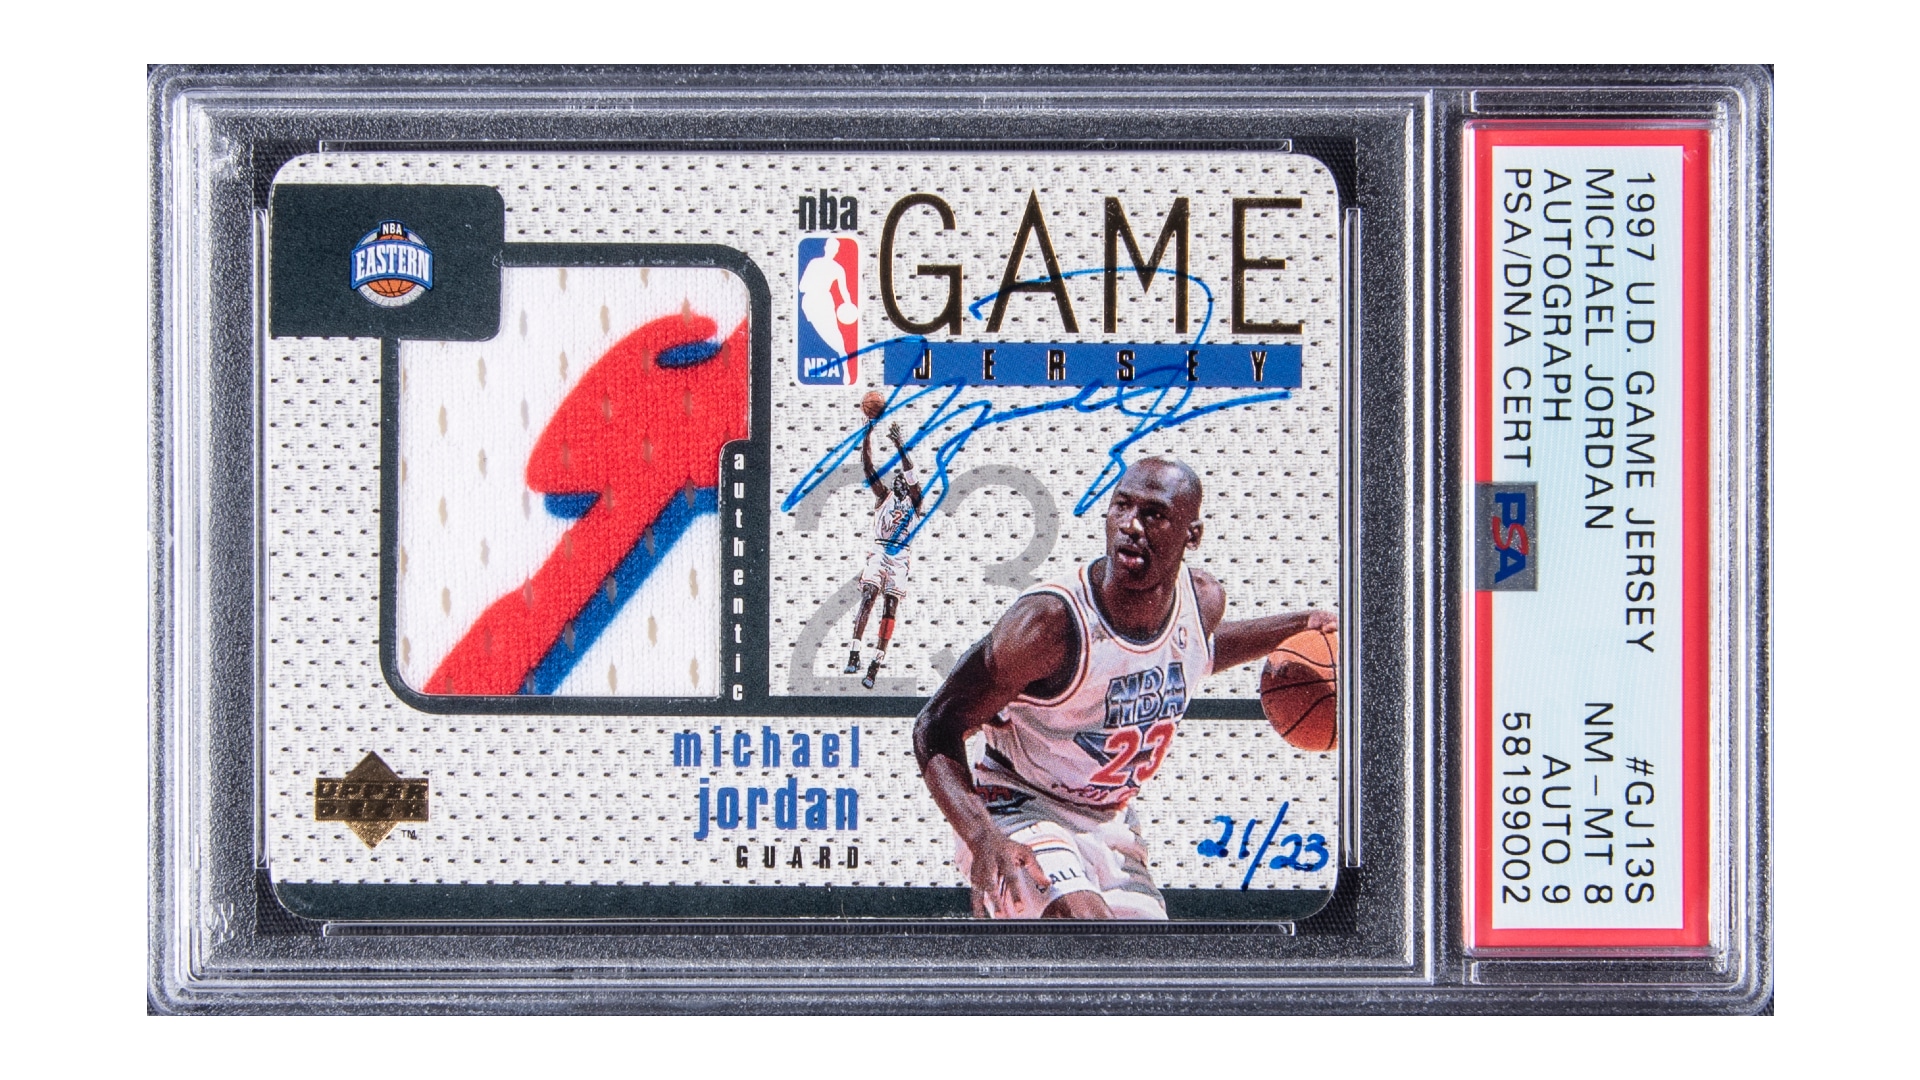 Rare Michael Jordan Rookie Basketball Card Could Sell For Up To $3